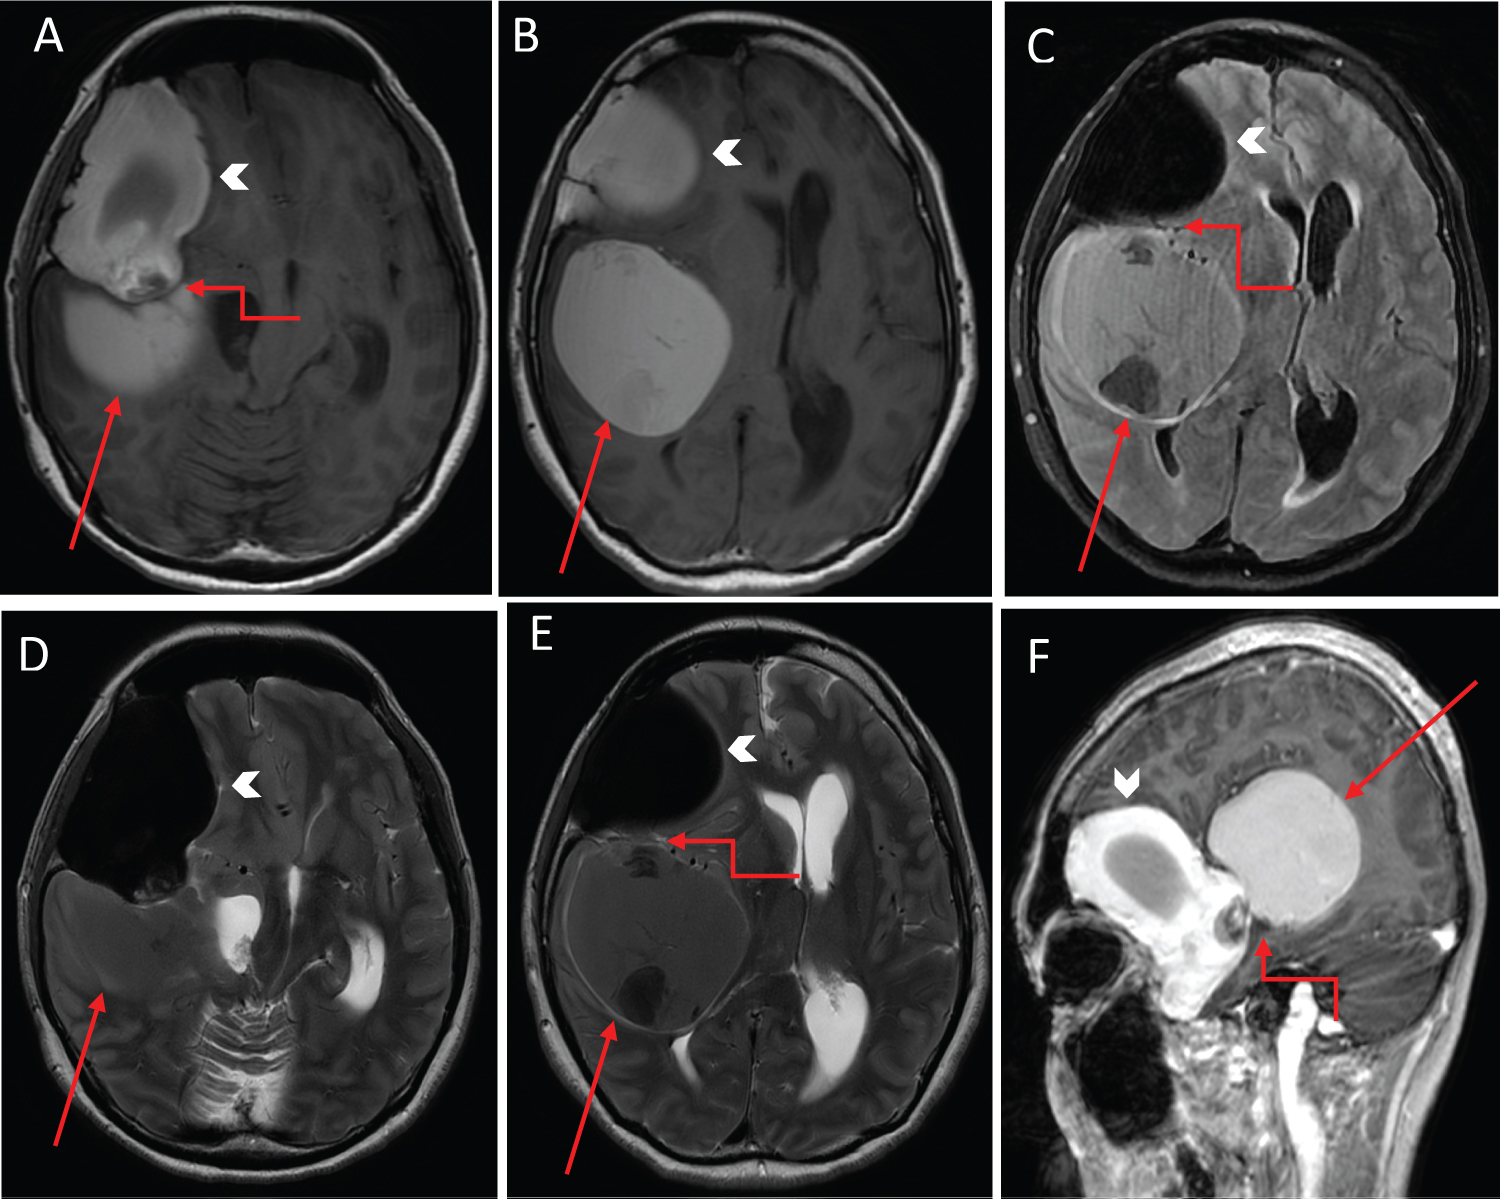 Simultaneous Discrete Intradiploic And Intracerebral Atypical